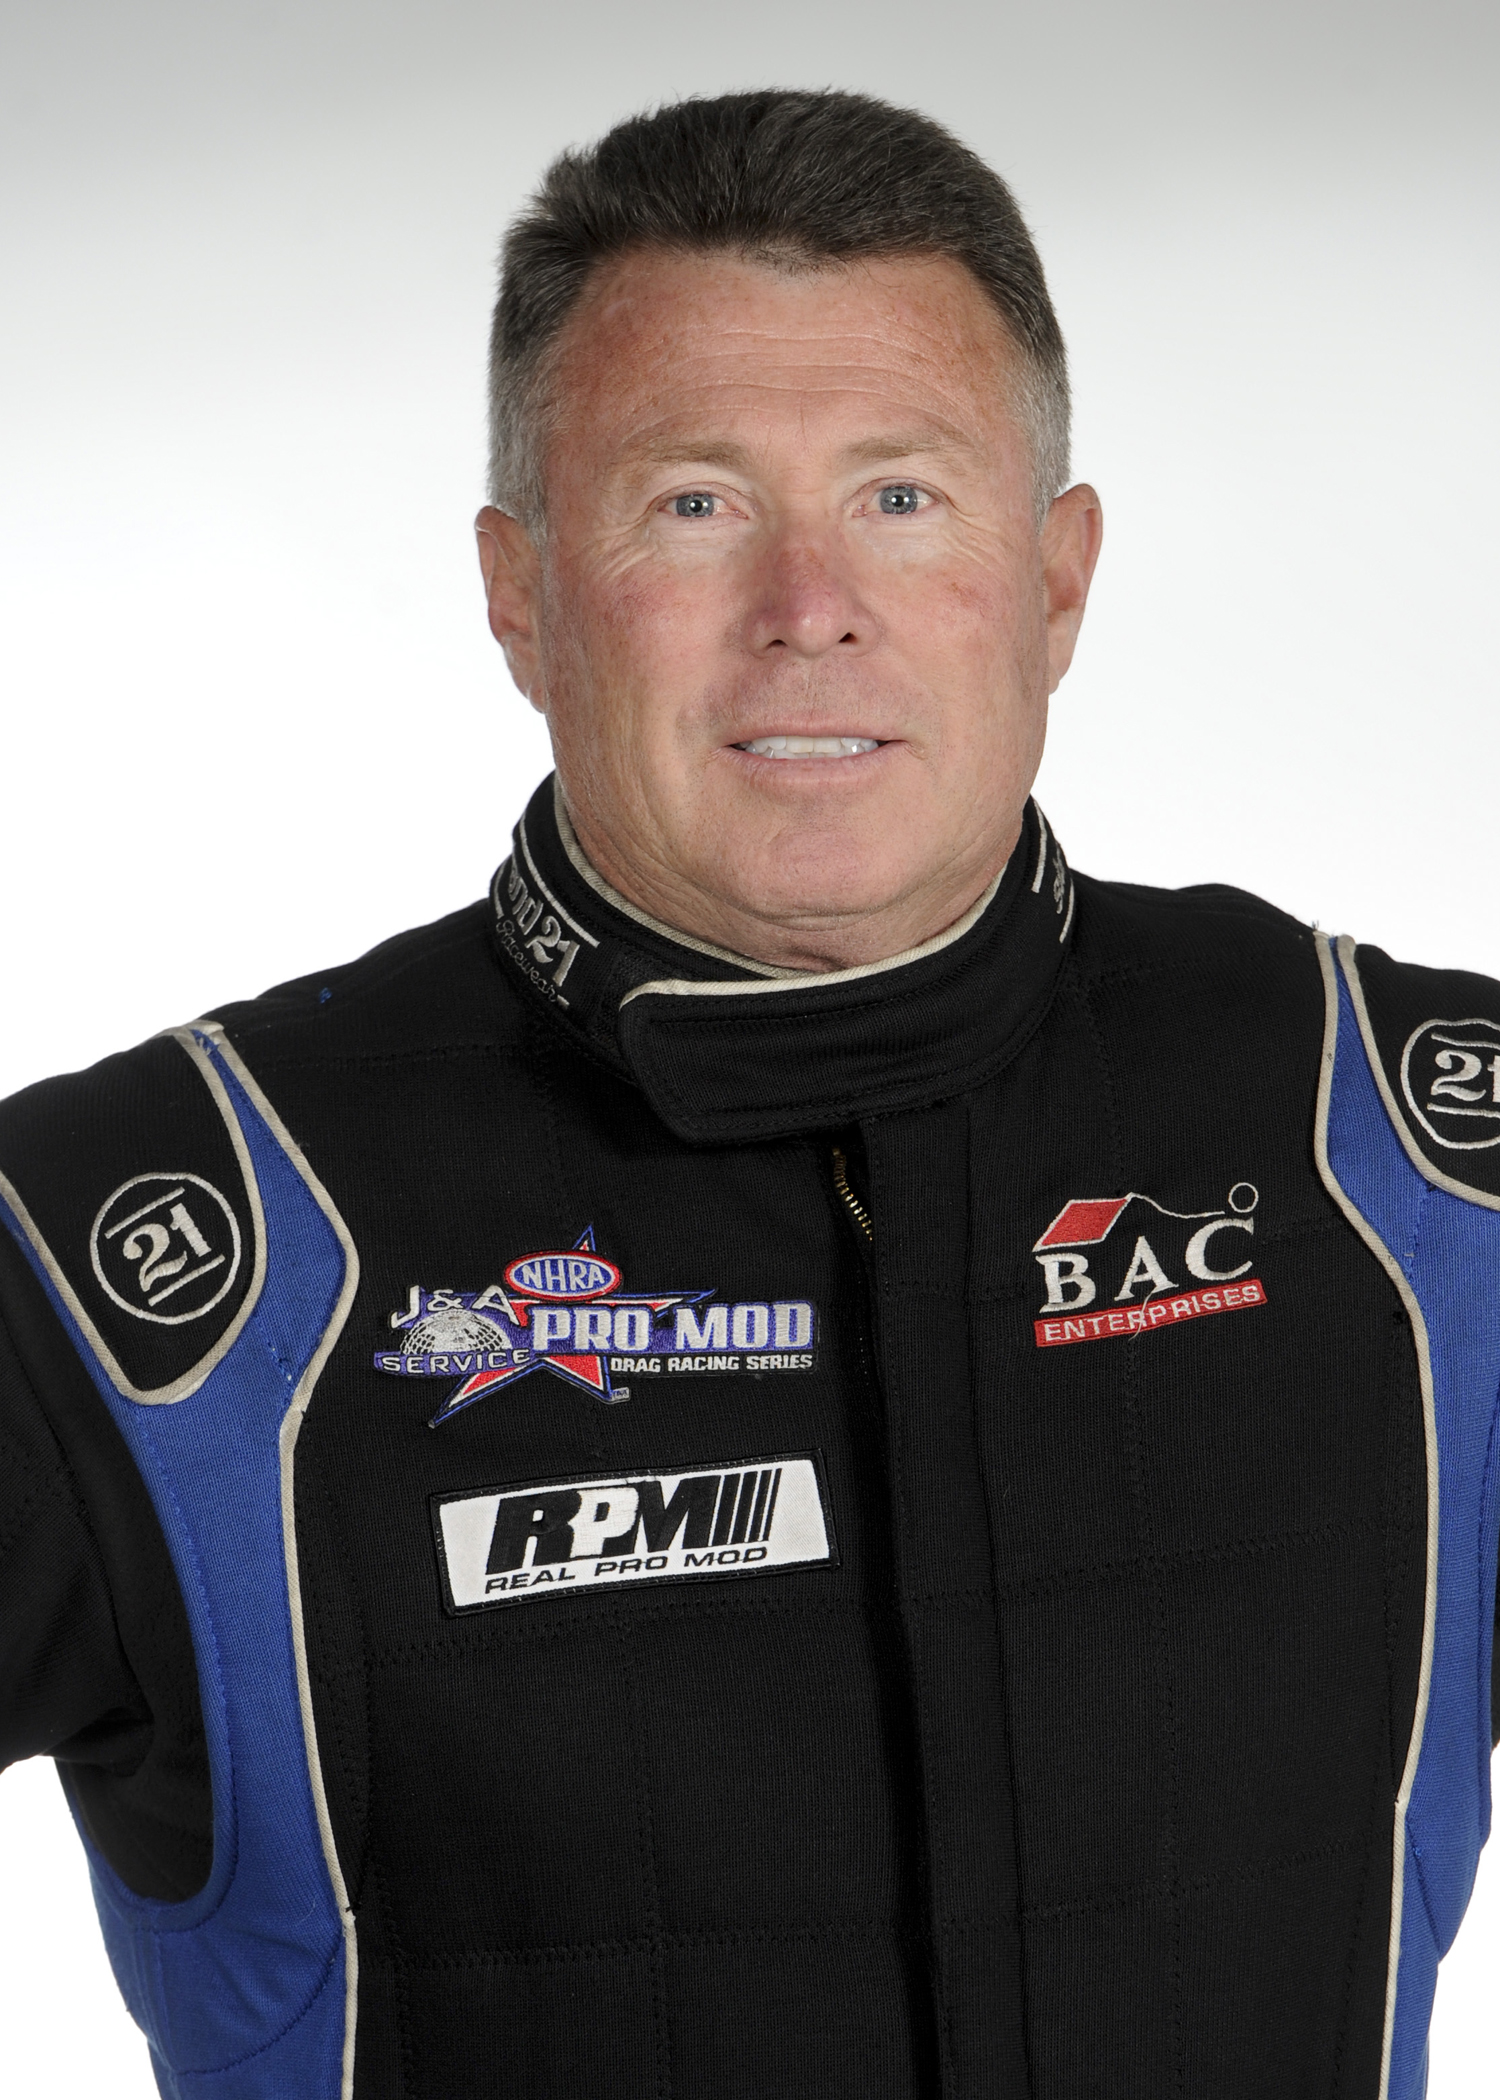  E3 Spark Plugs Highlights the Players in Pro Mod: Clint Satterfield